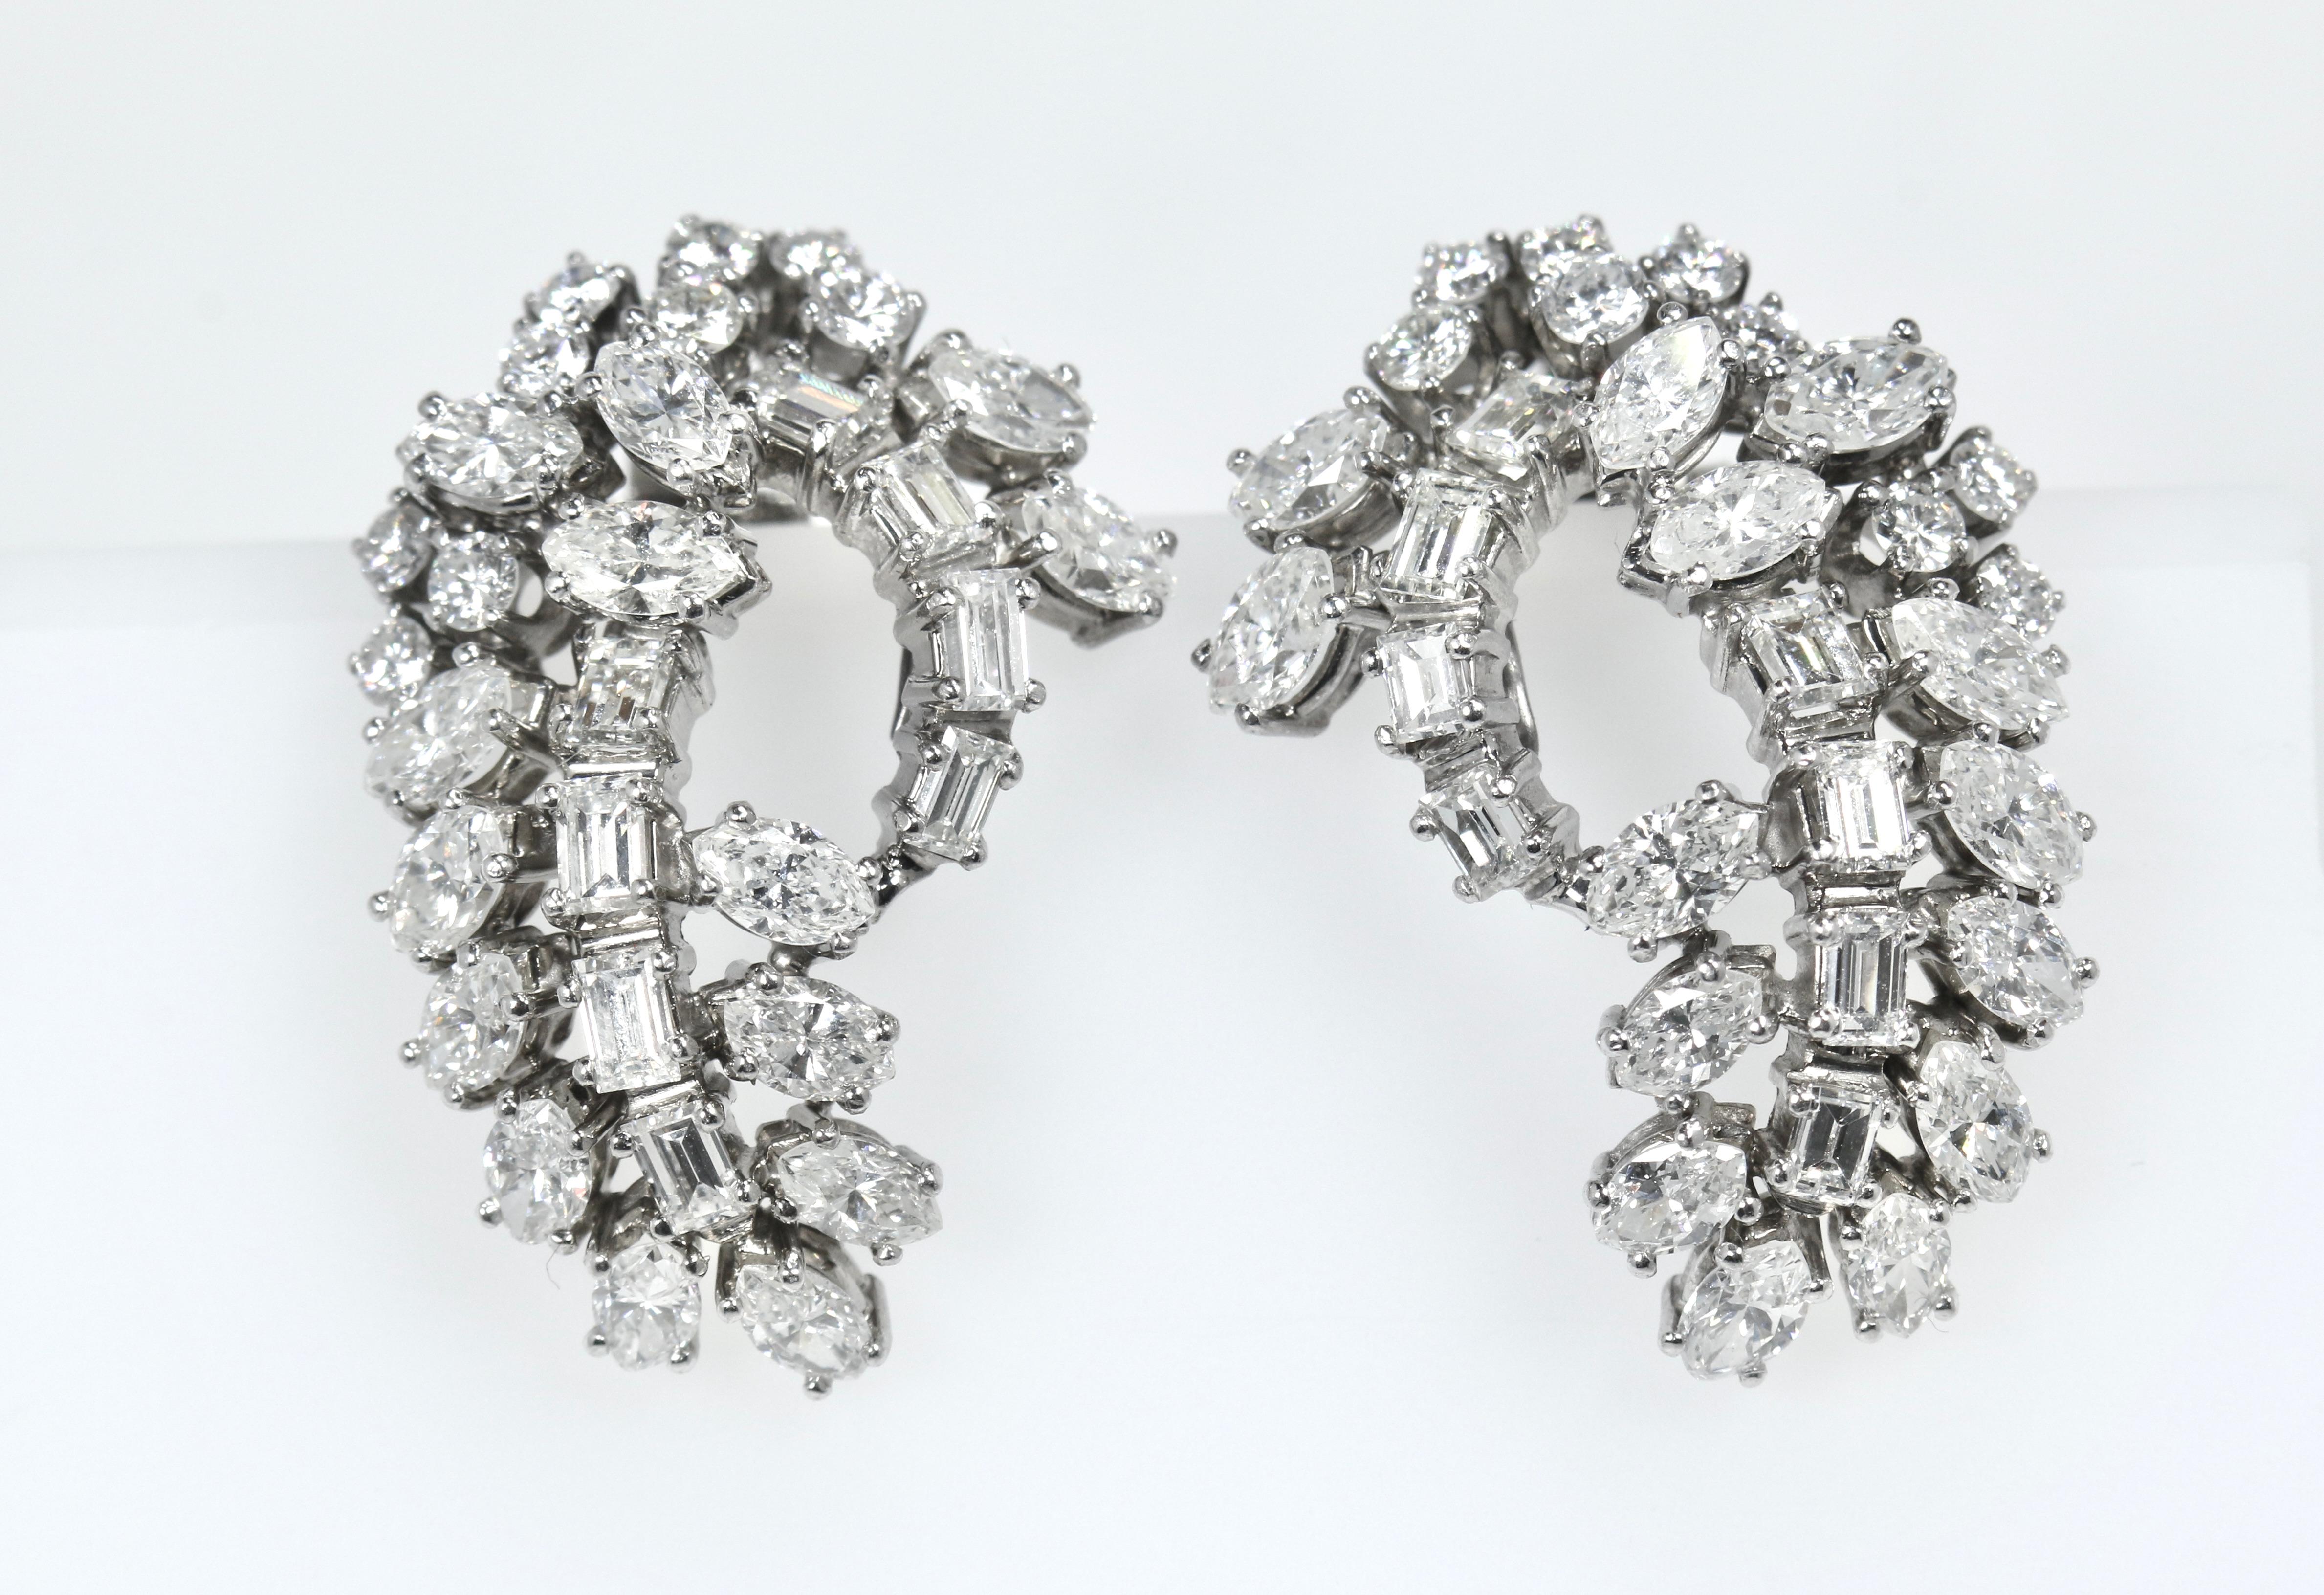 Five Carat Diamond Earrings in Platinum.  Gorgeous Look!  Hook for Dangling Charms off them as well.  